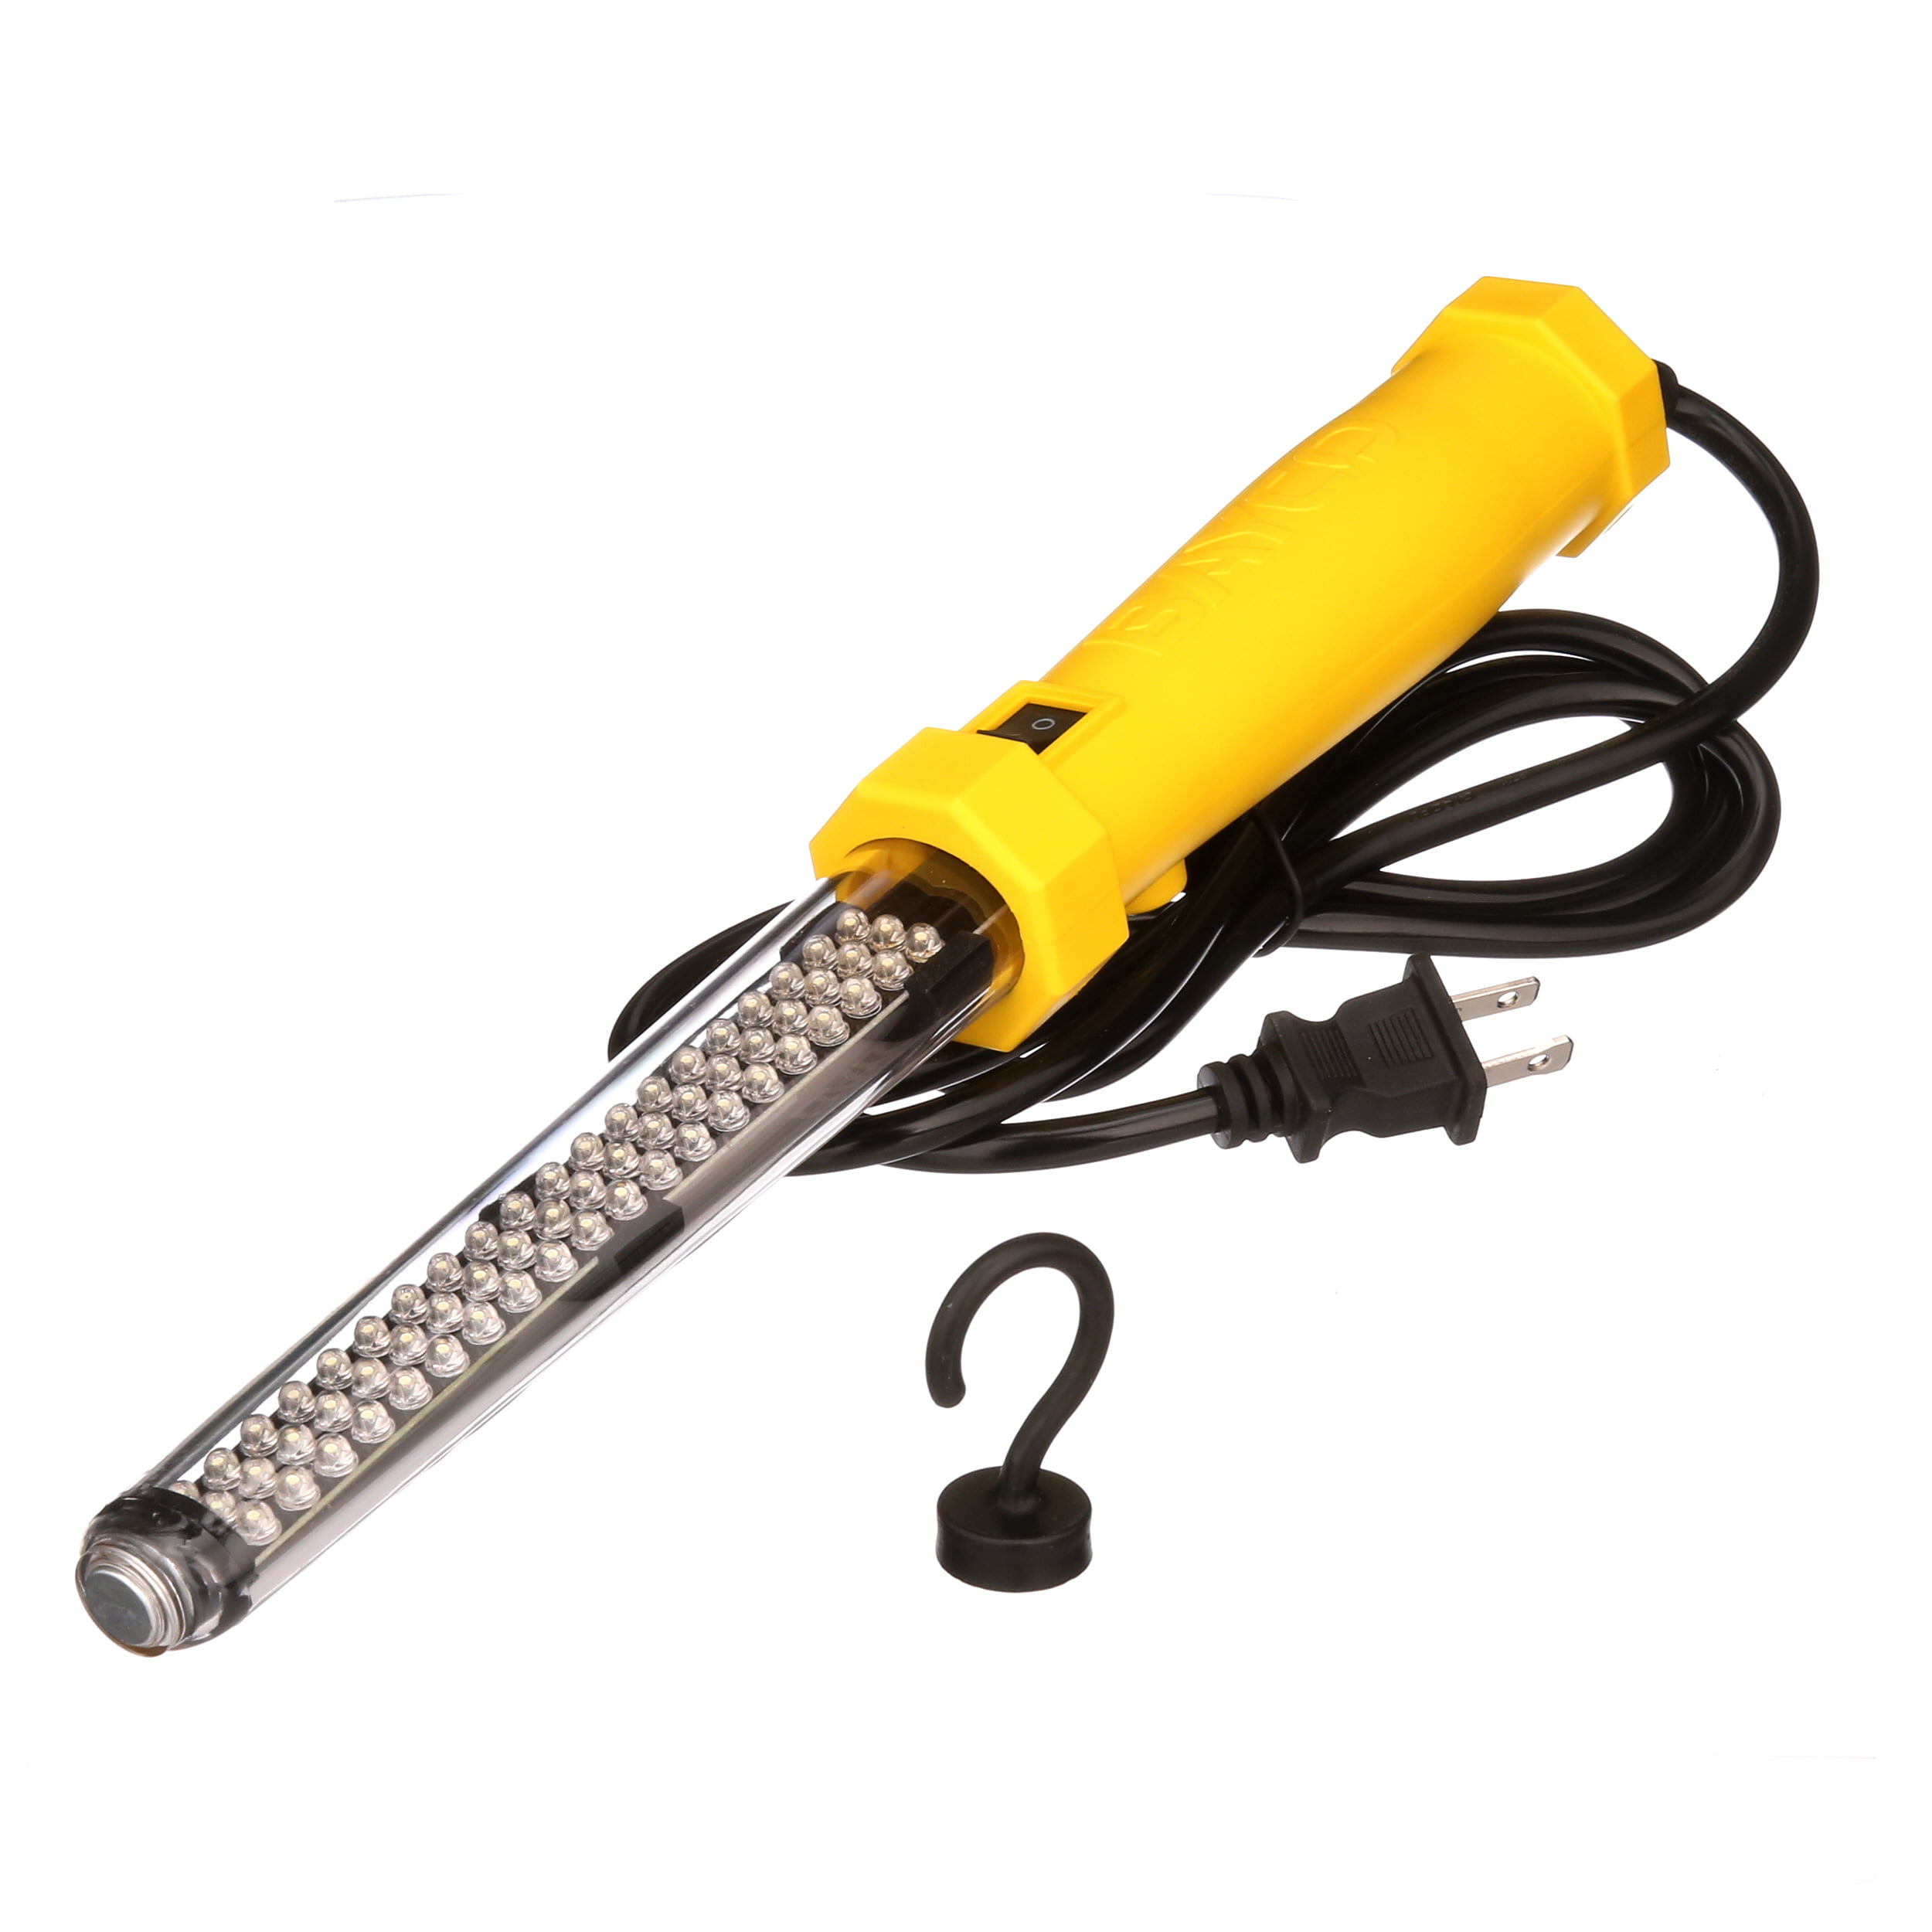 Bayco BA-2116 6 Foot Cord Corded LED Work Light with Magnetic Hook 